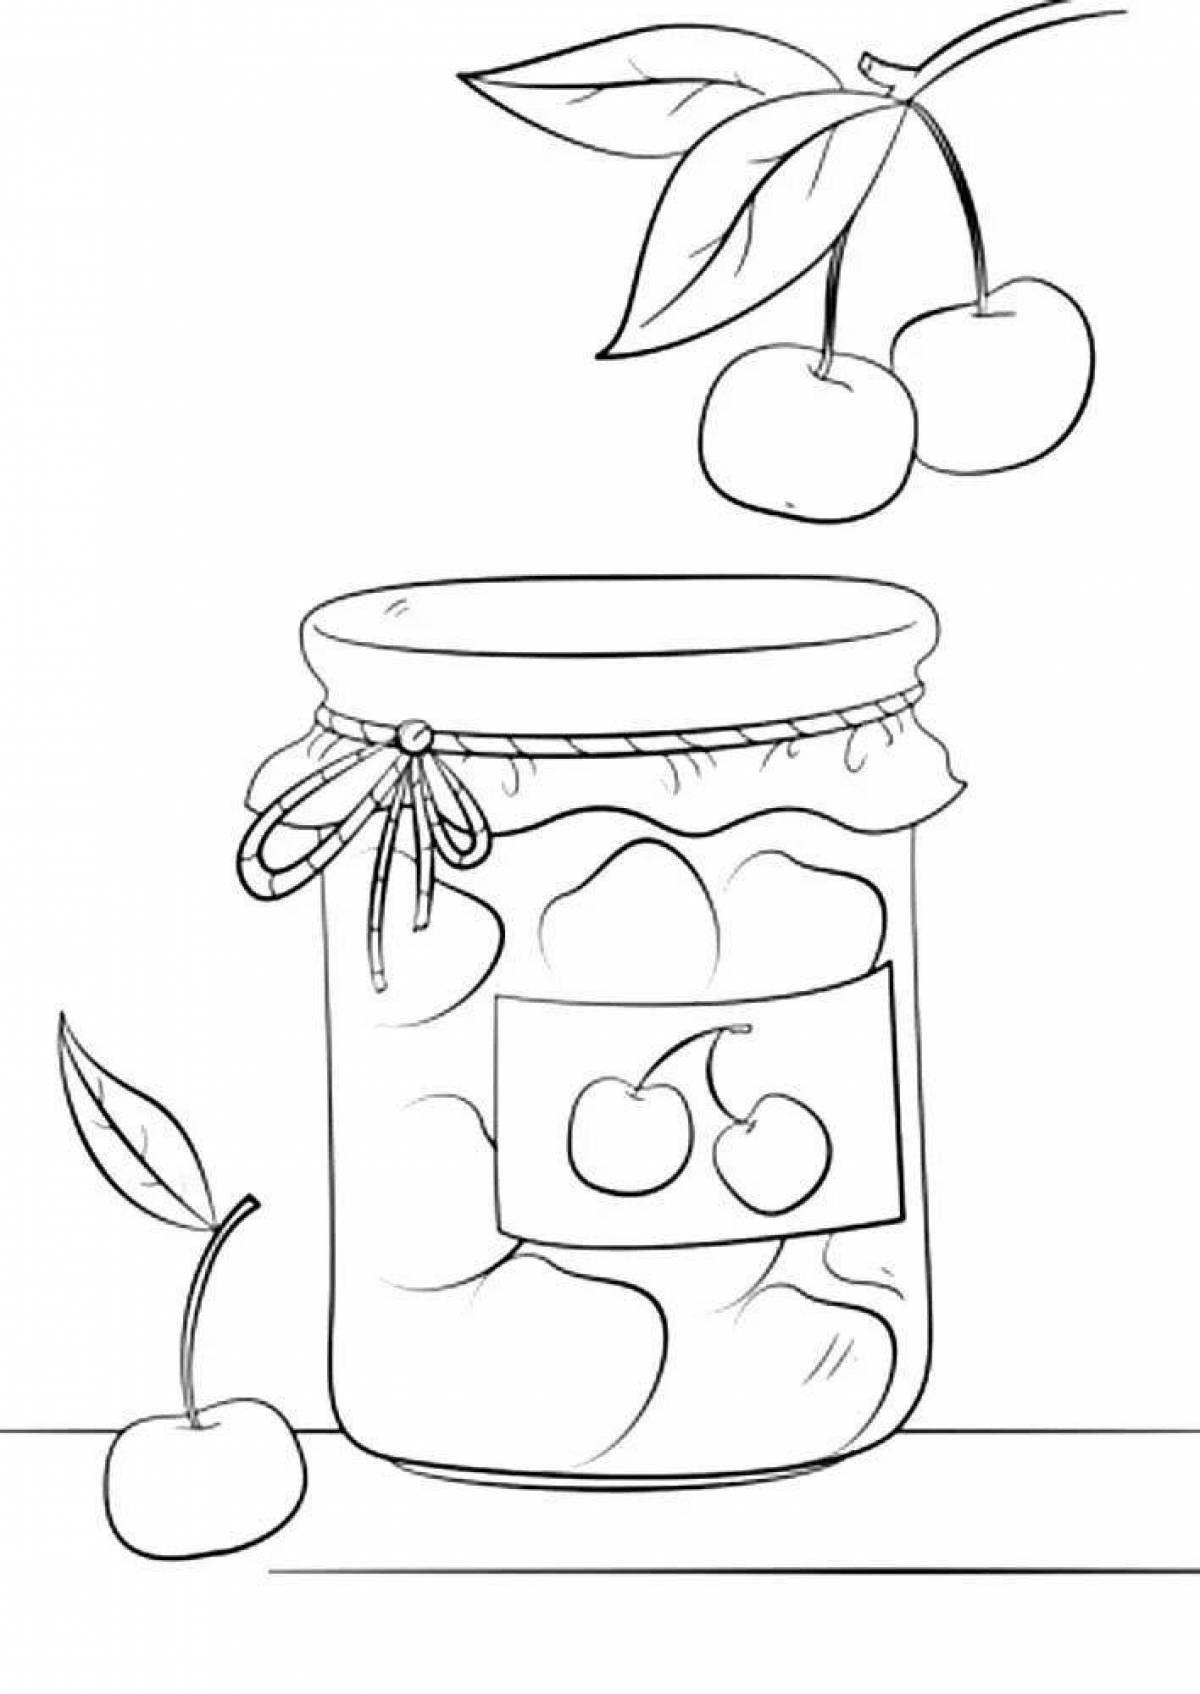 Coloring page inviting jar of jam